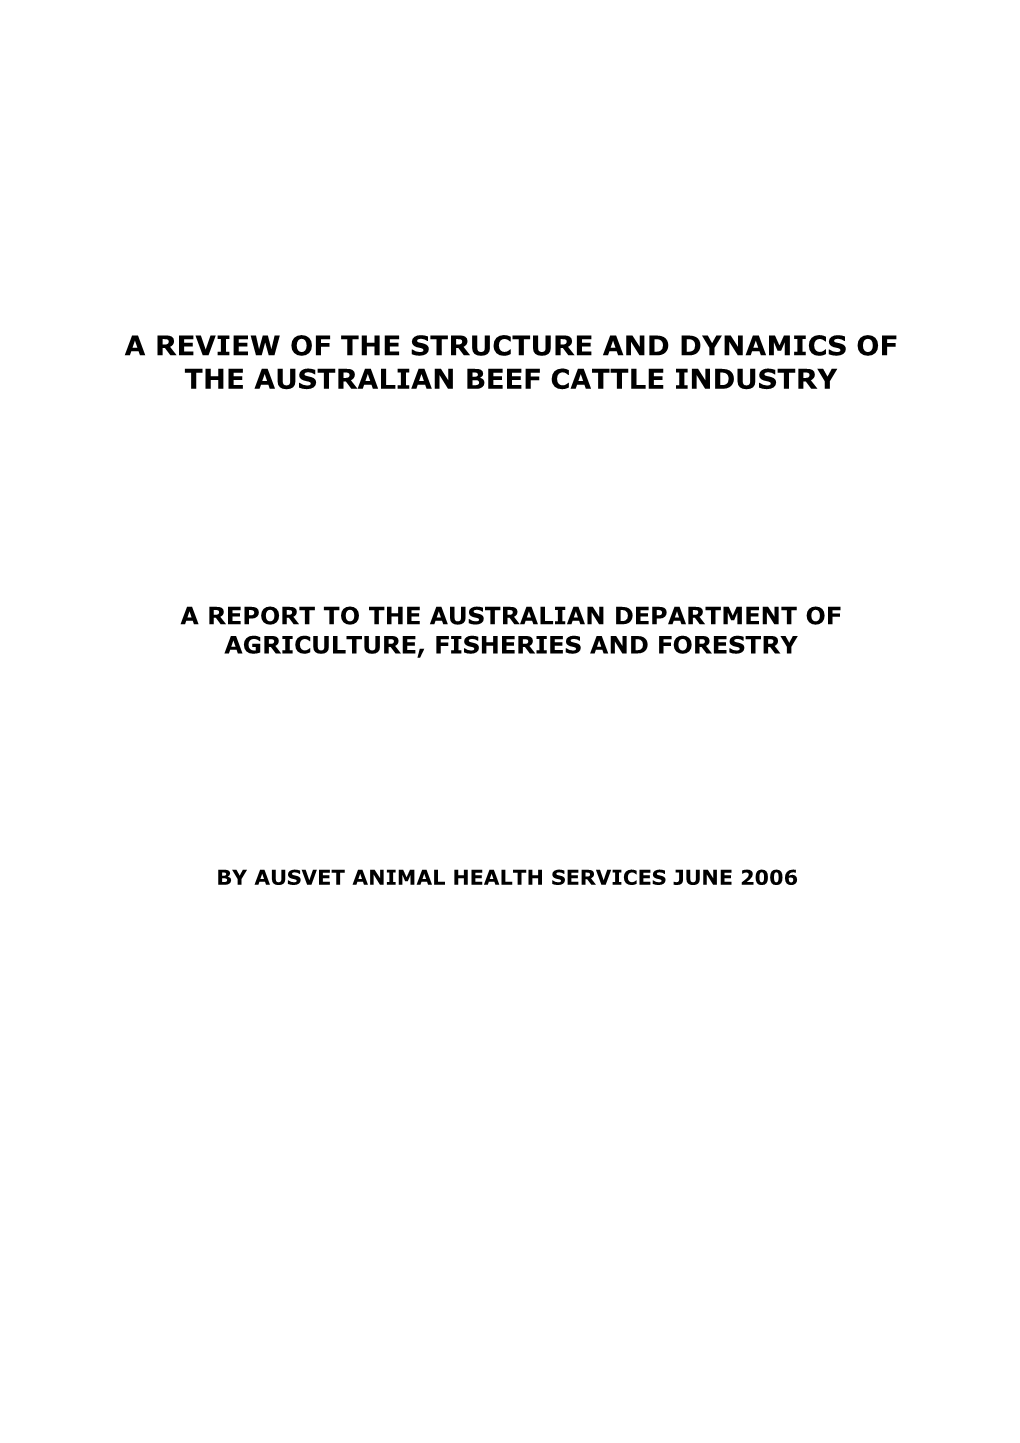 A Review of the Structure and Dynamics of the Australian Beef Cattle Industry